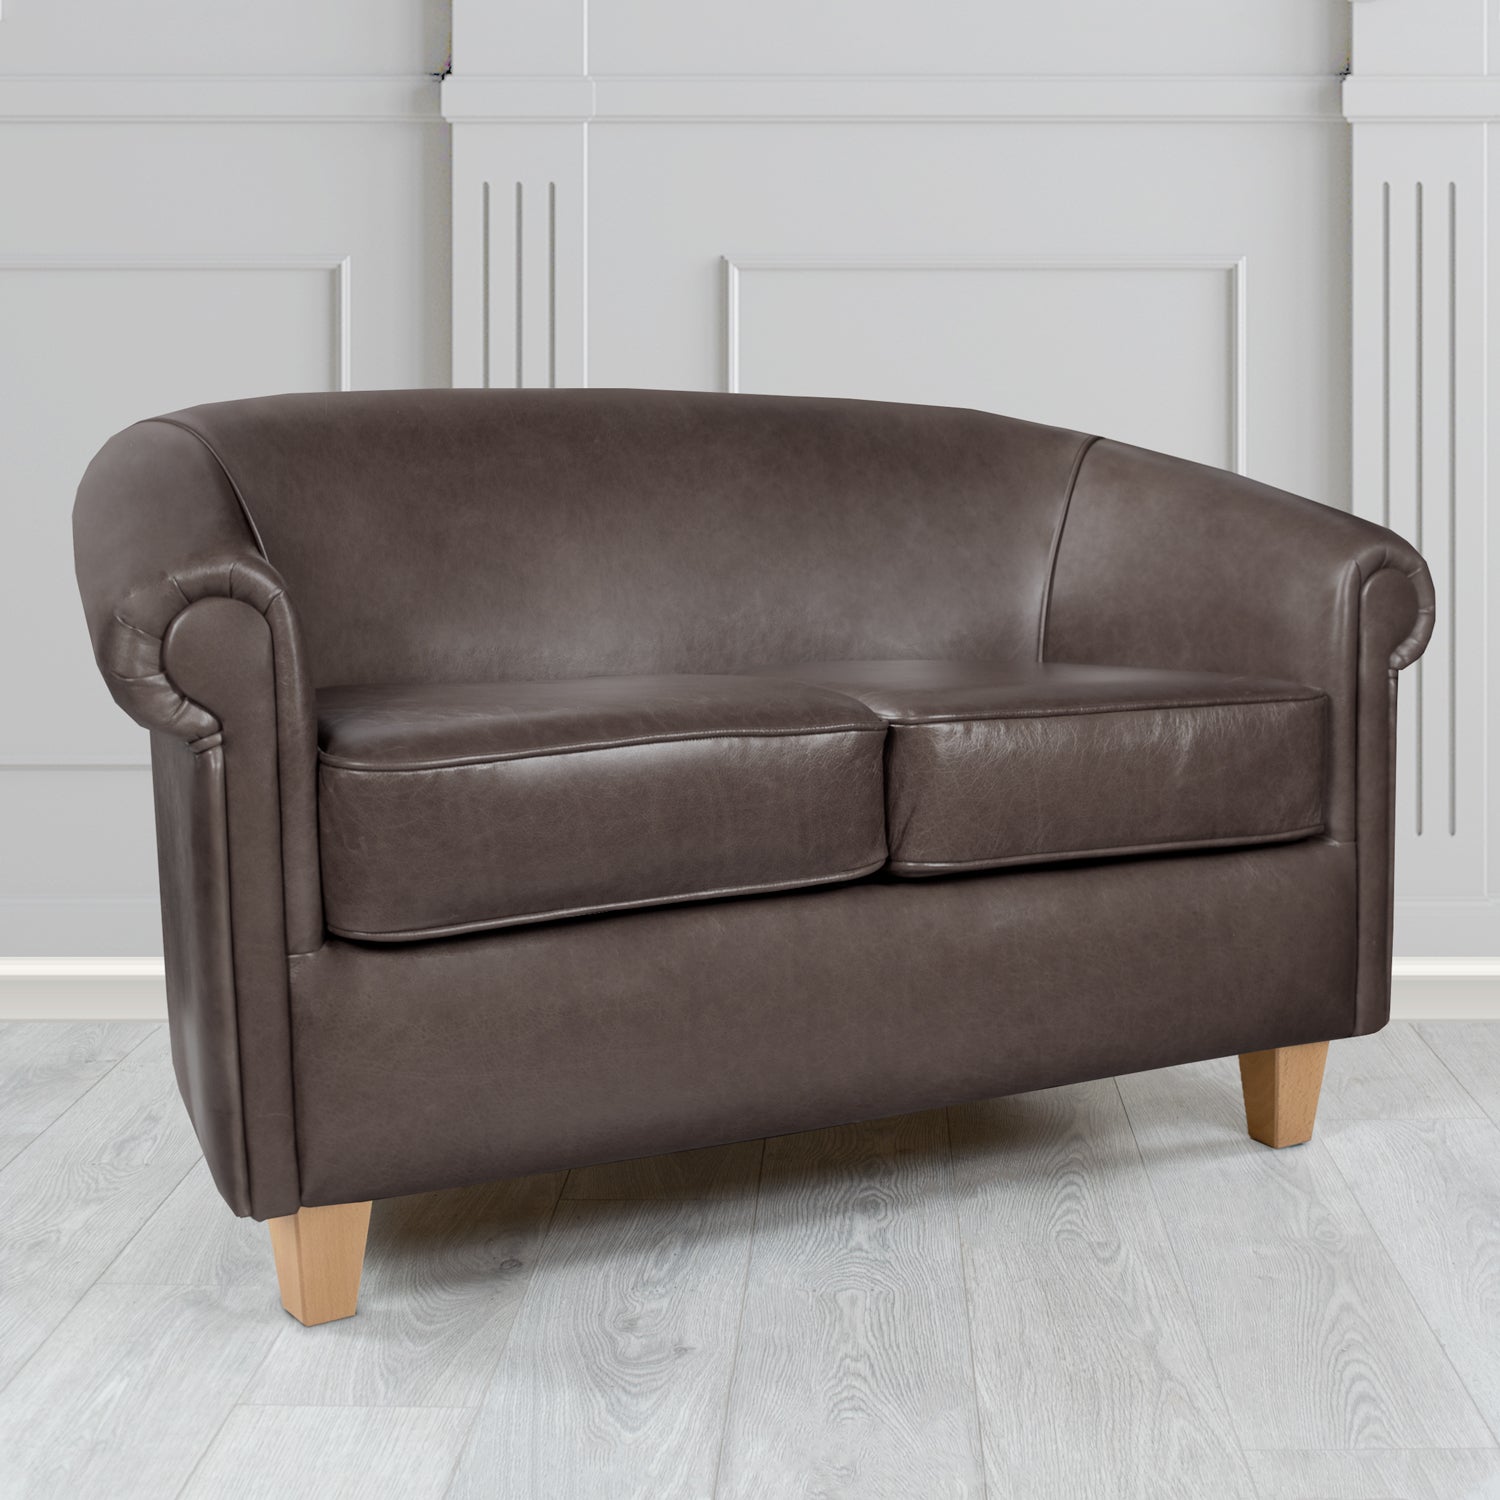 Siena 2 Seater Tub Sofa in Crib 5 Old English Storm Genuine Leather - The Tub Chair Shop